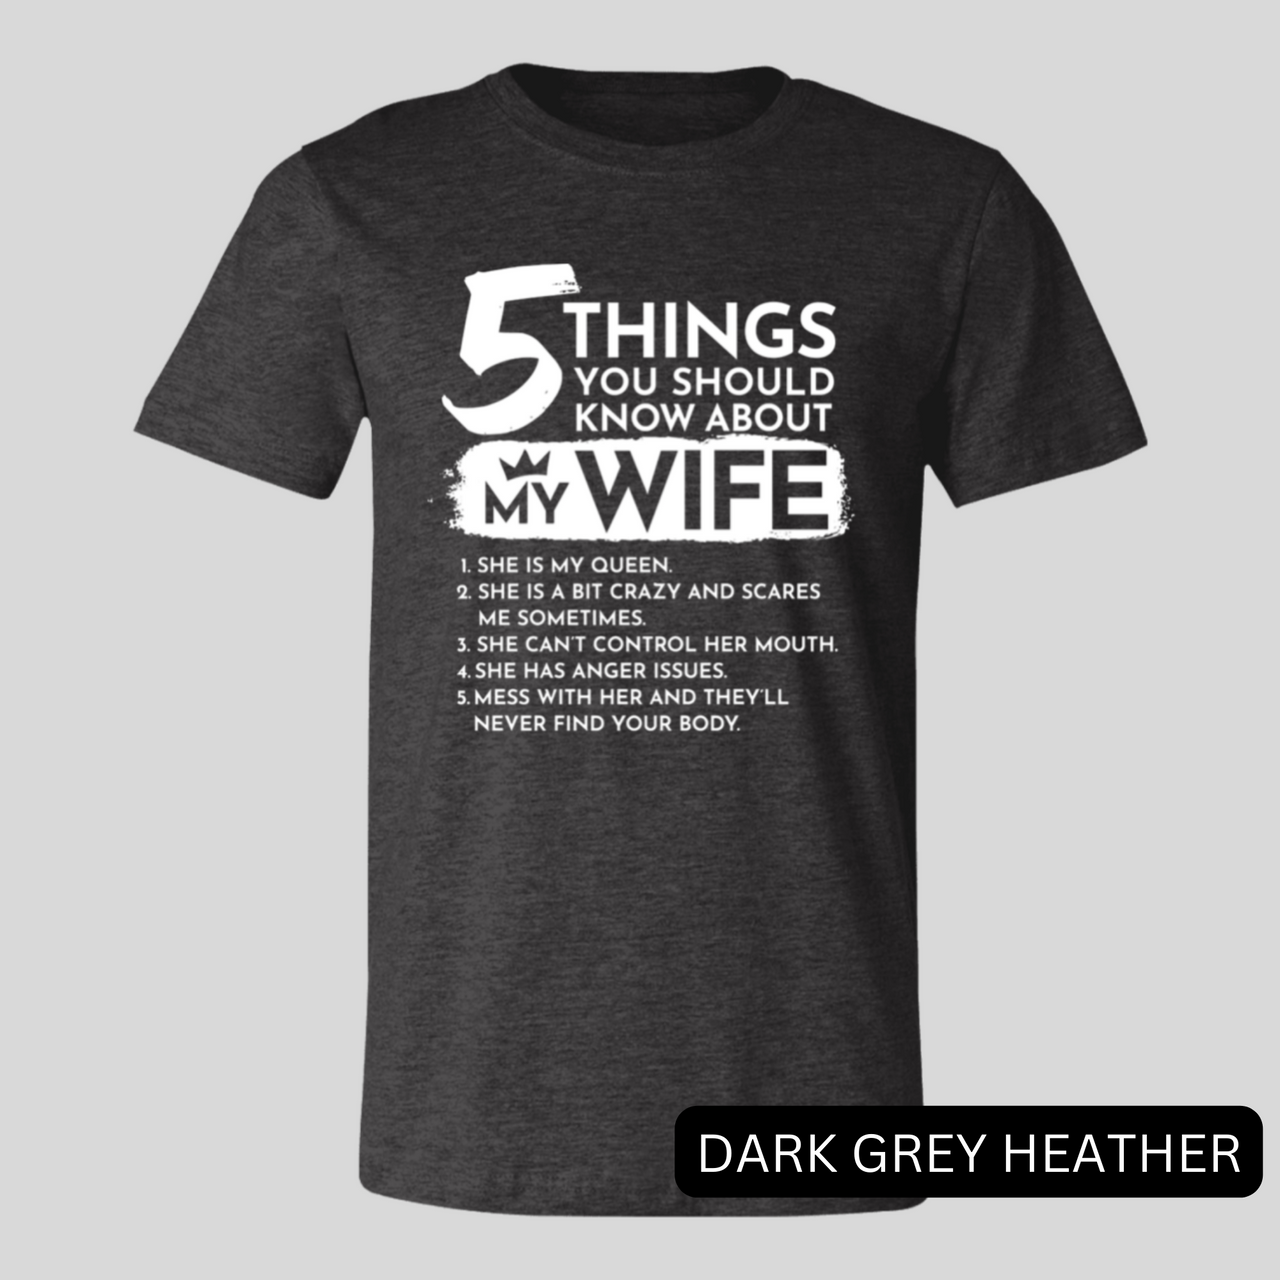 5 things you should know about my wife dark grey heather shirt